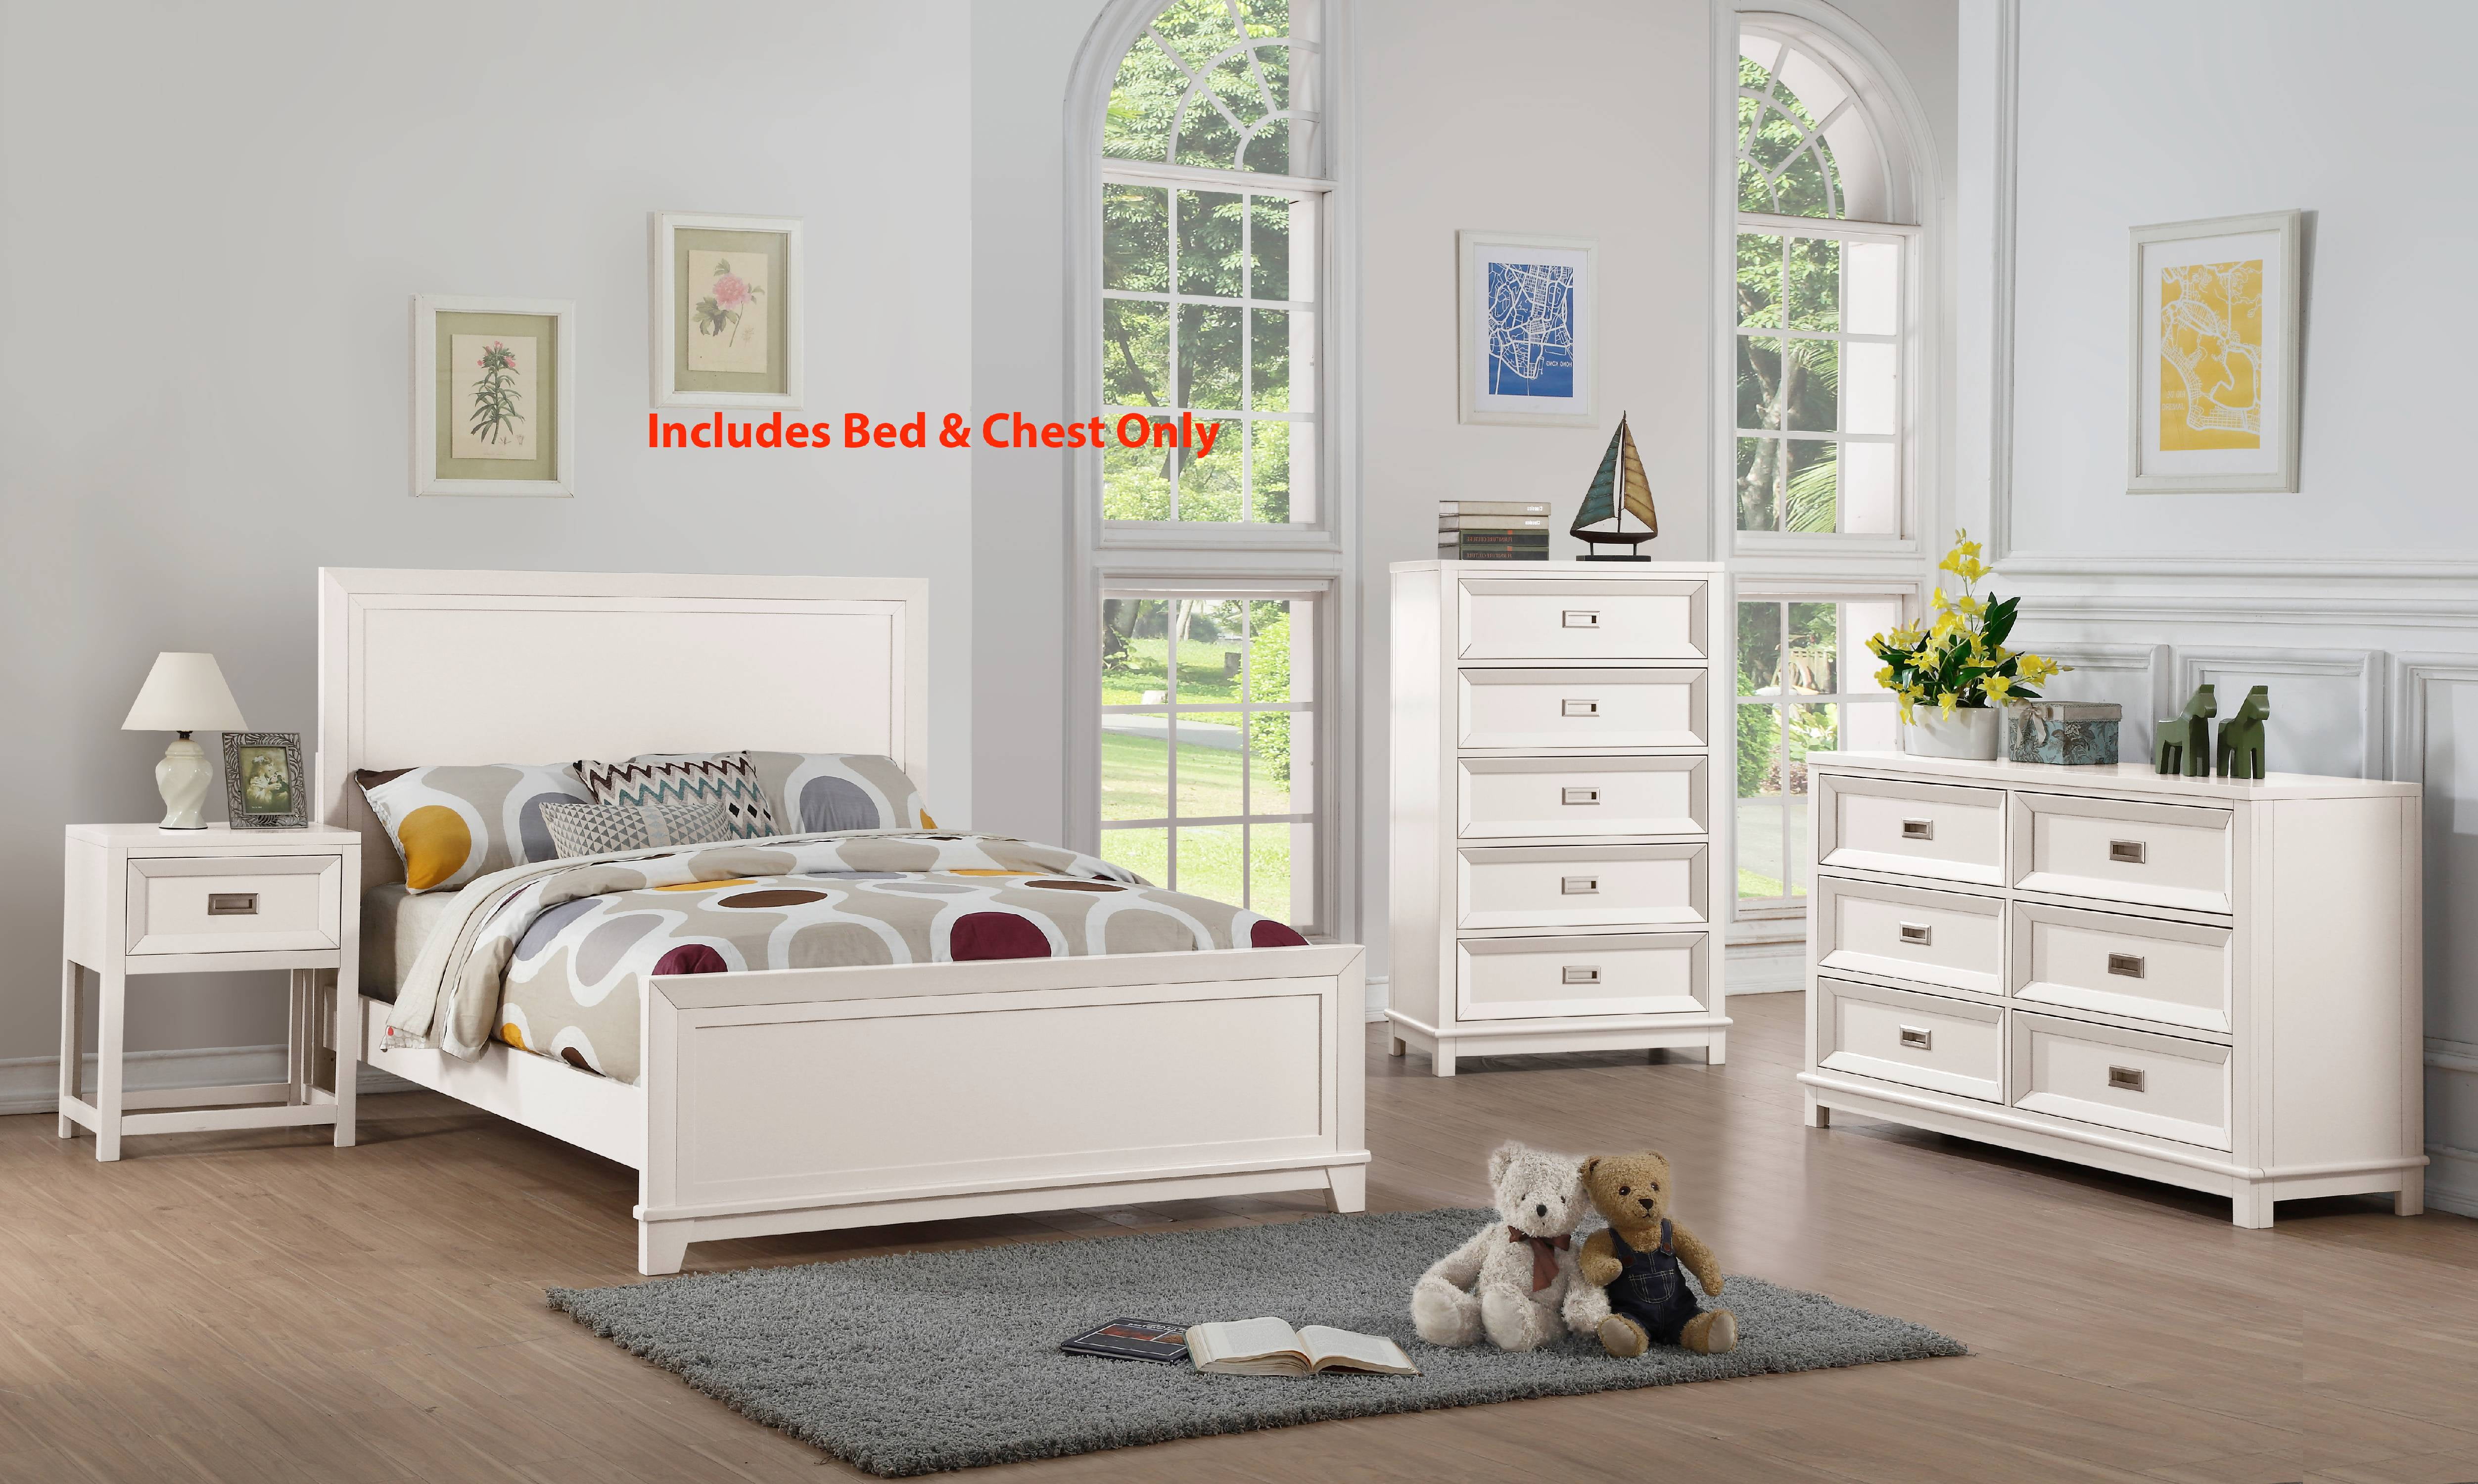 Victoria 2 Piece Twin Size White Wood Contemporary Kids Bedroom Set (Panel Bed, Chest) (KD